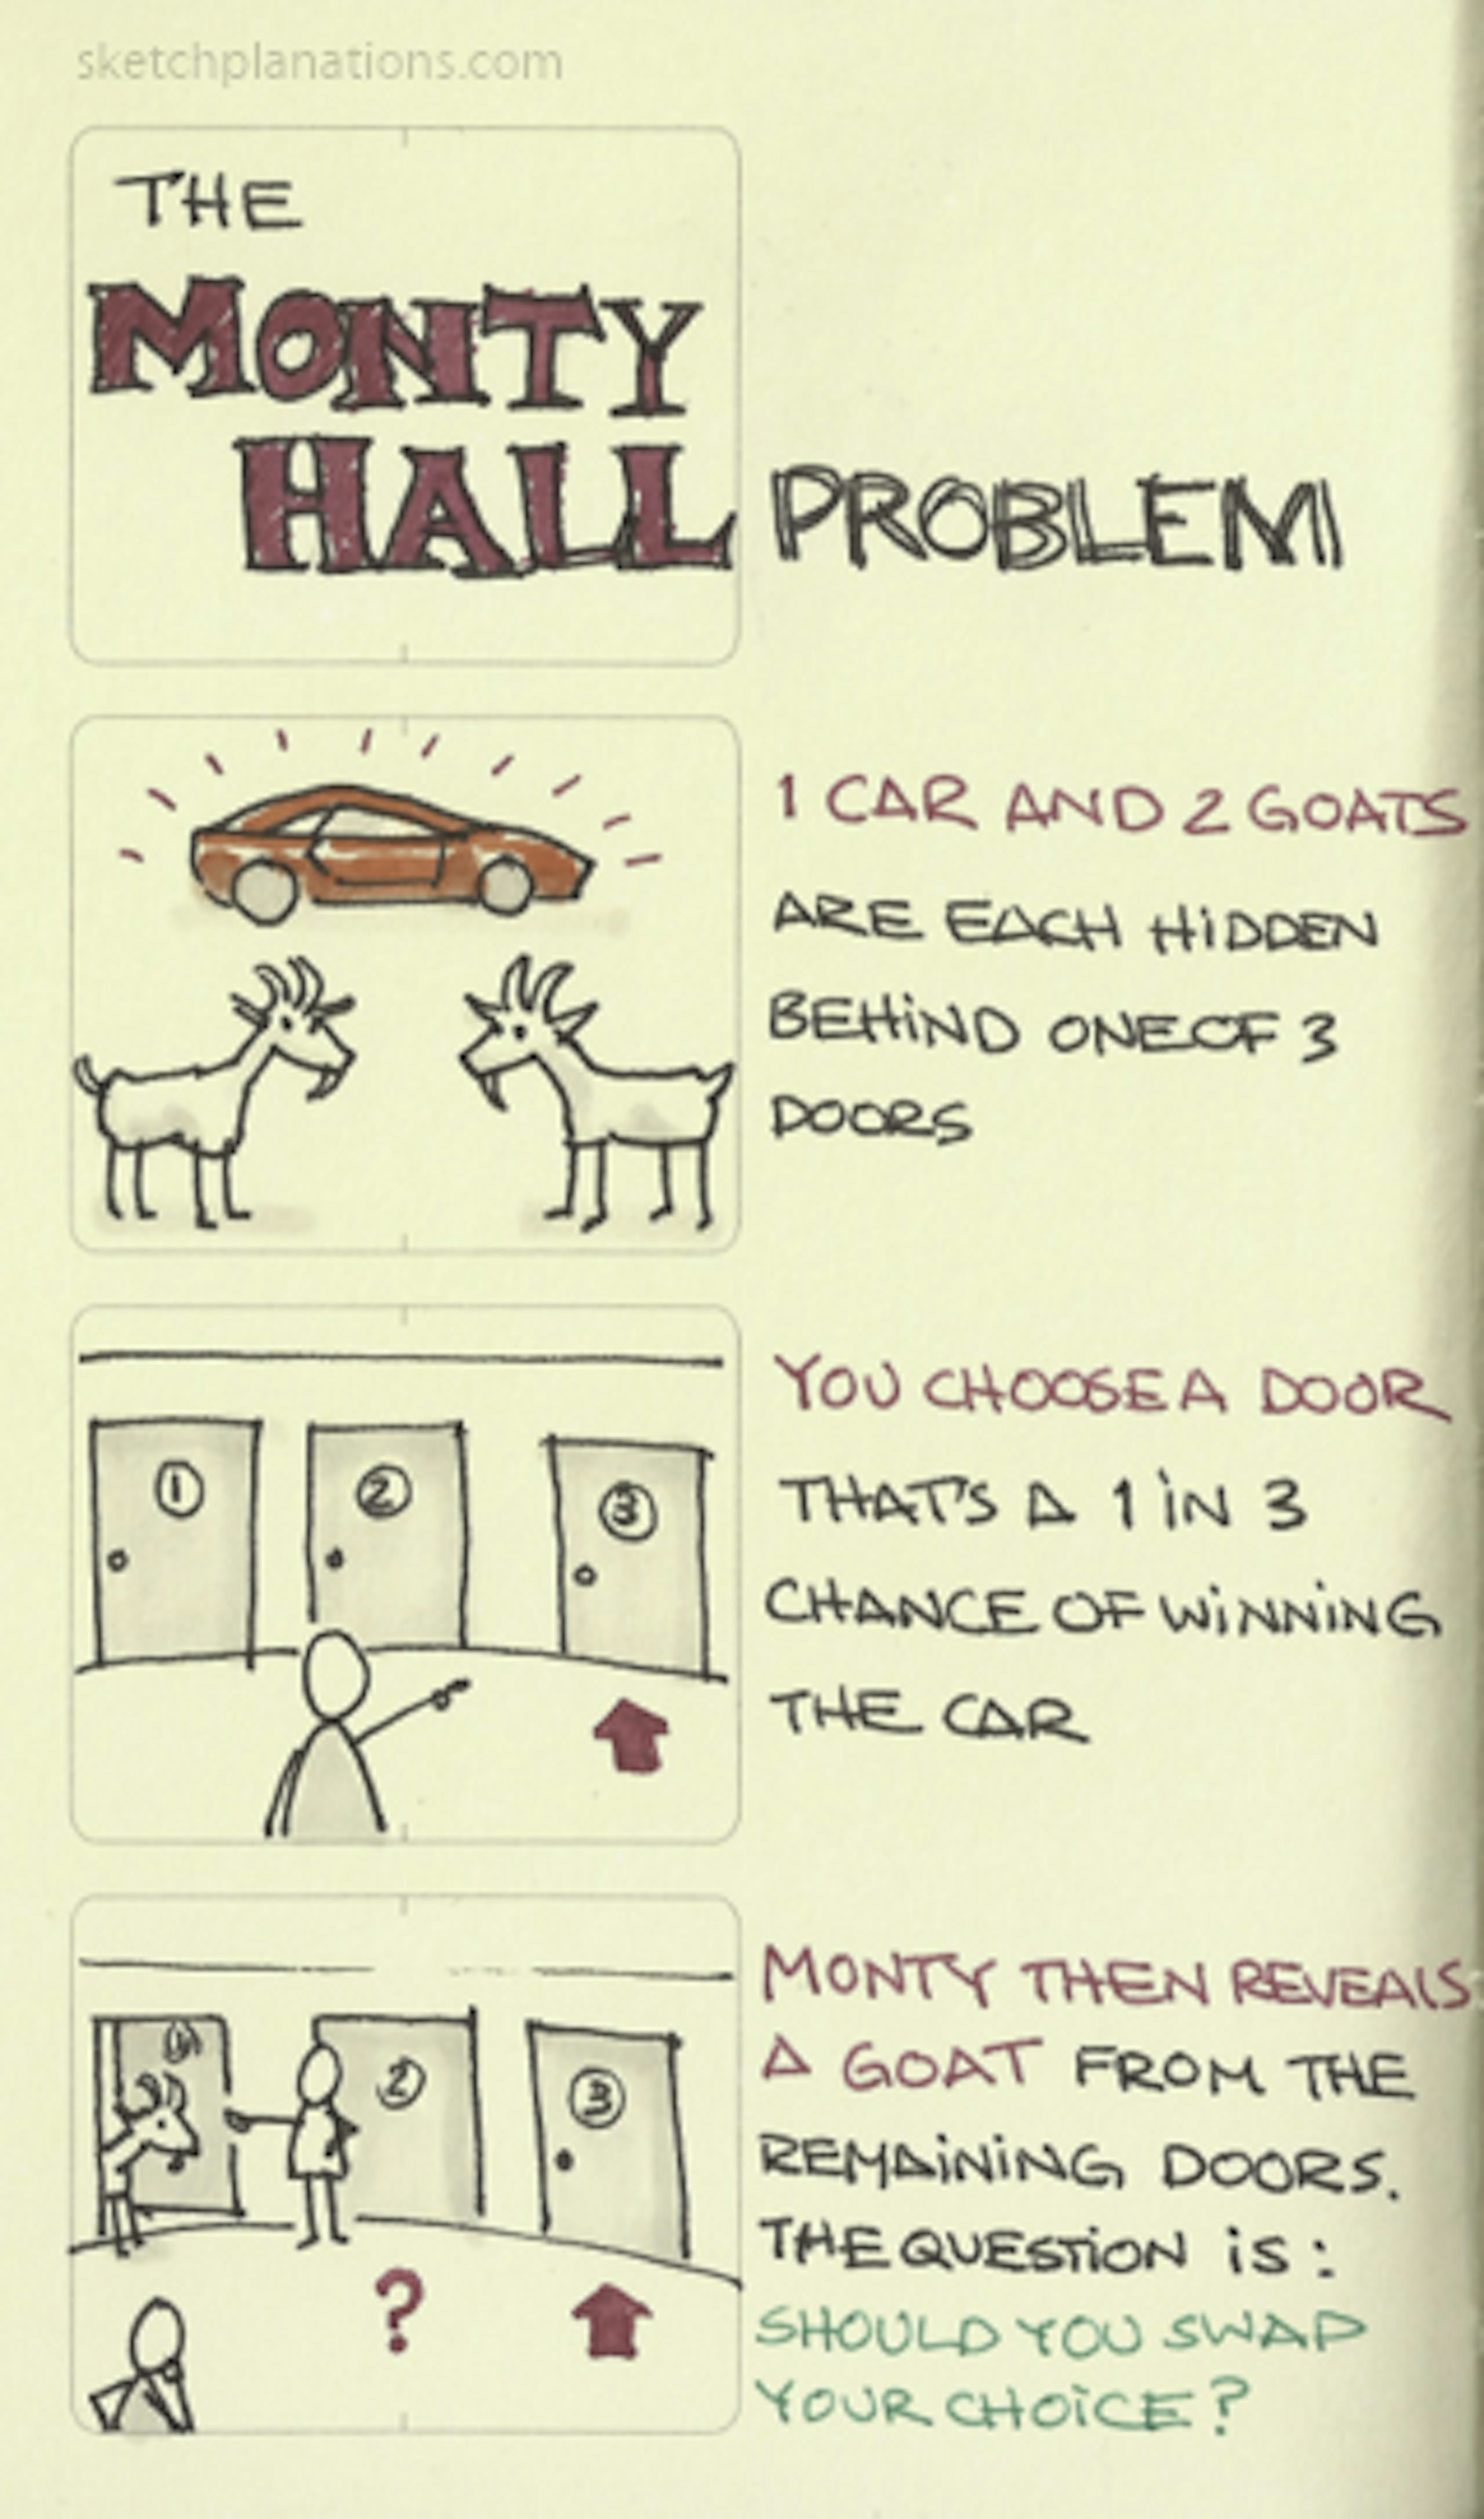 The Monty Hall problem - Sketchplanations